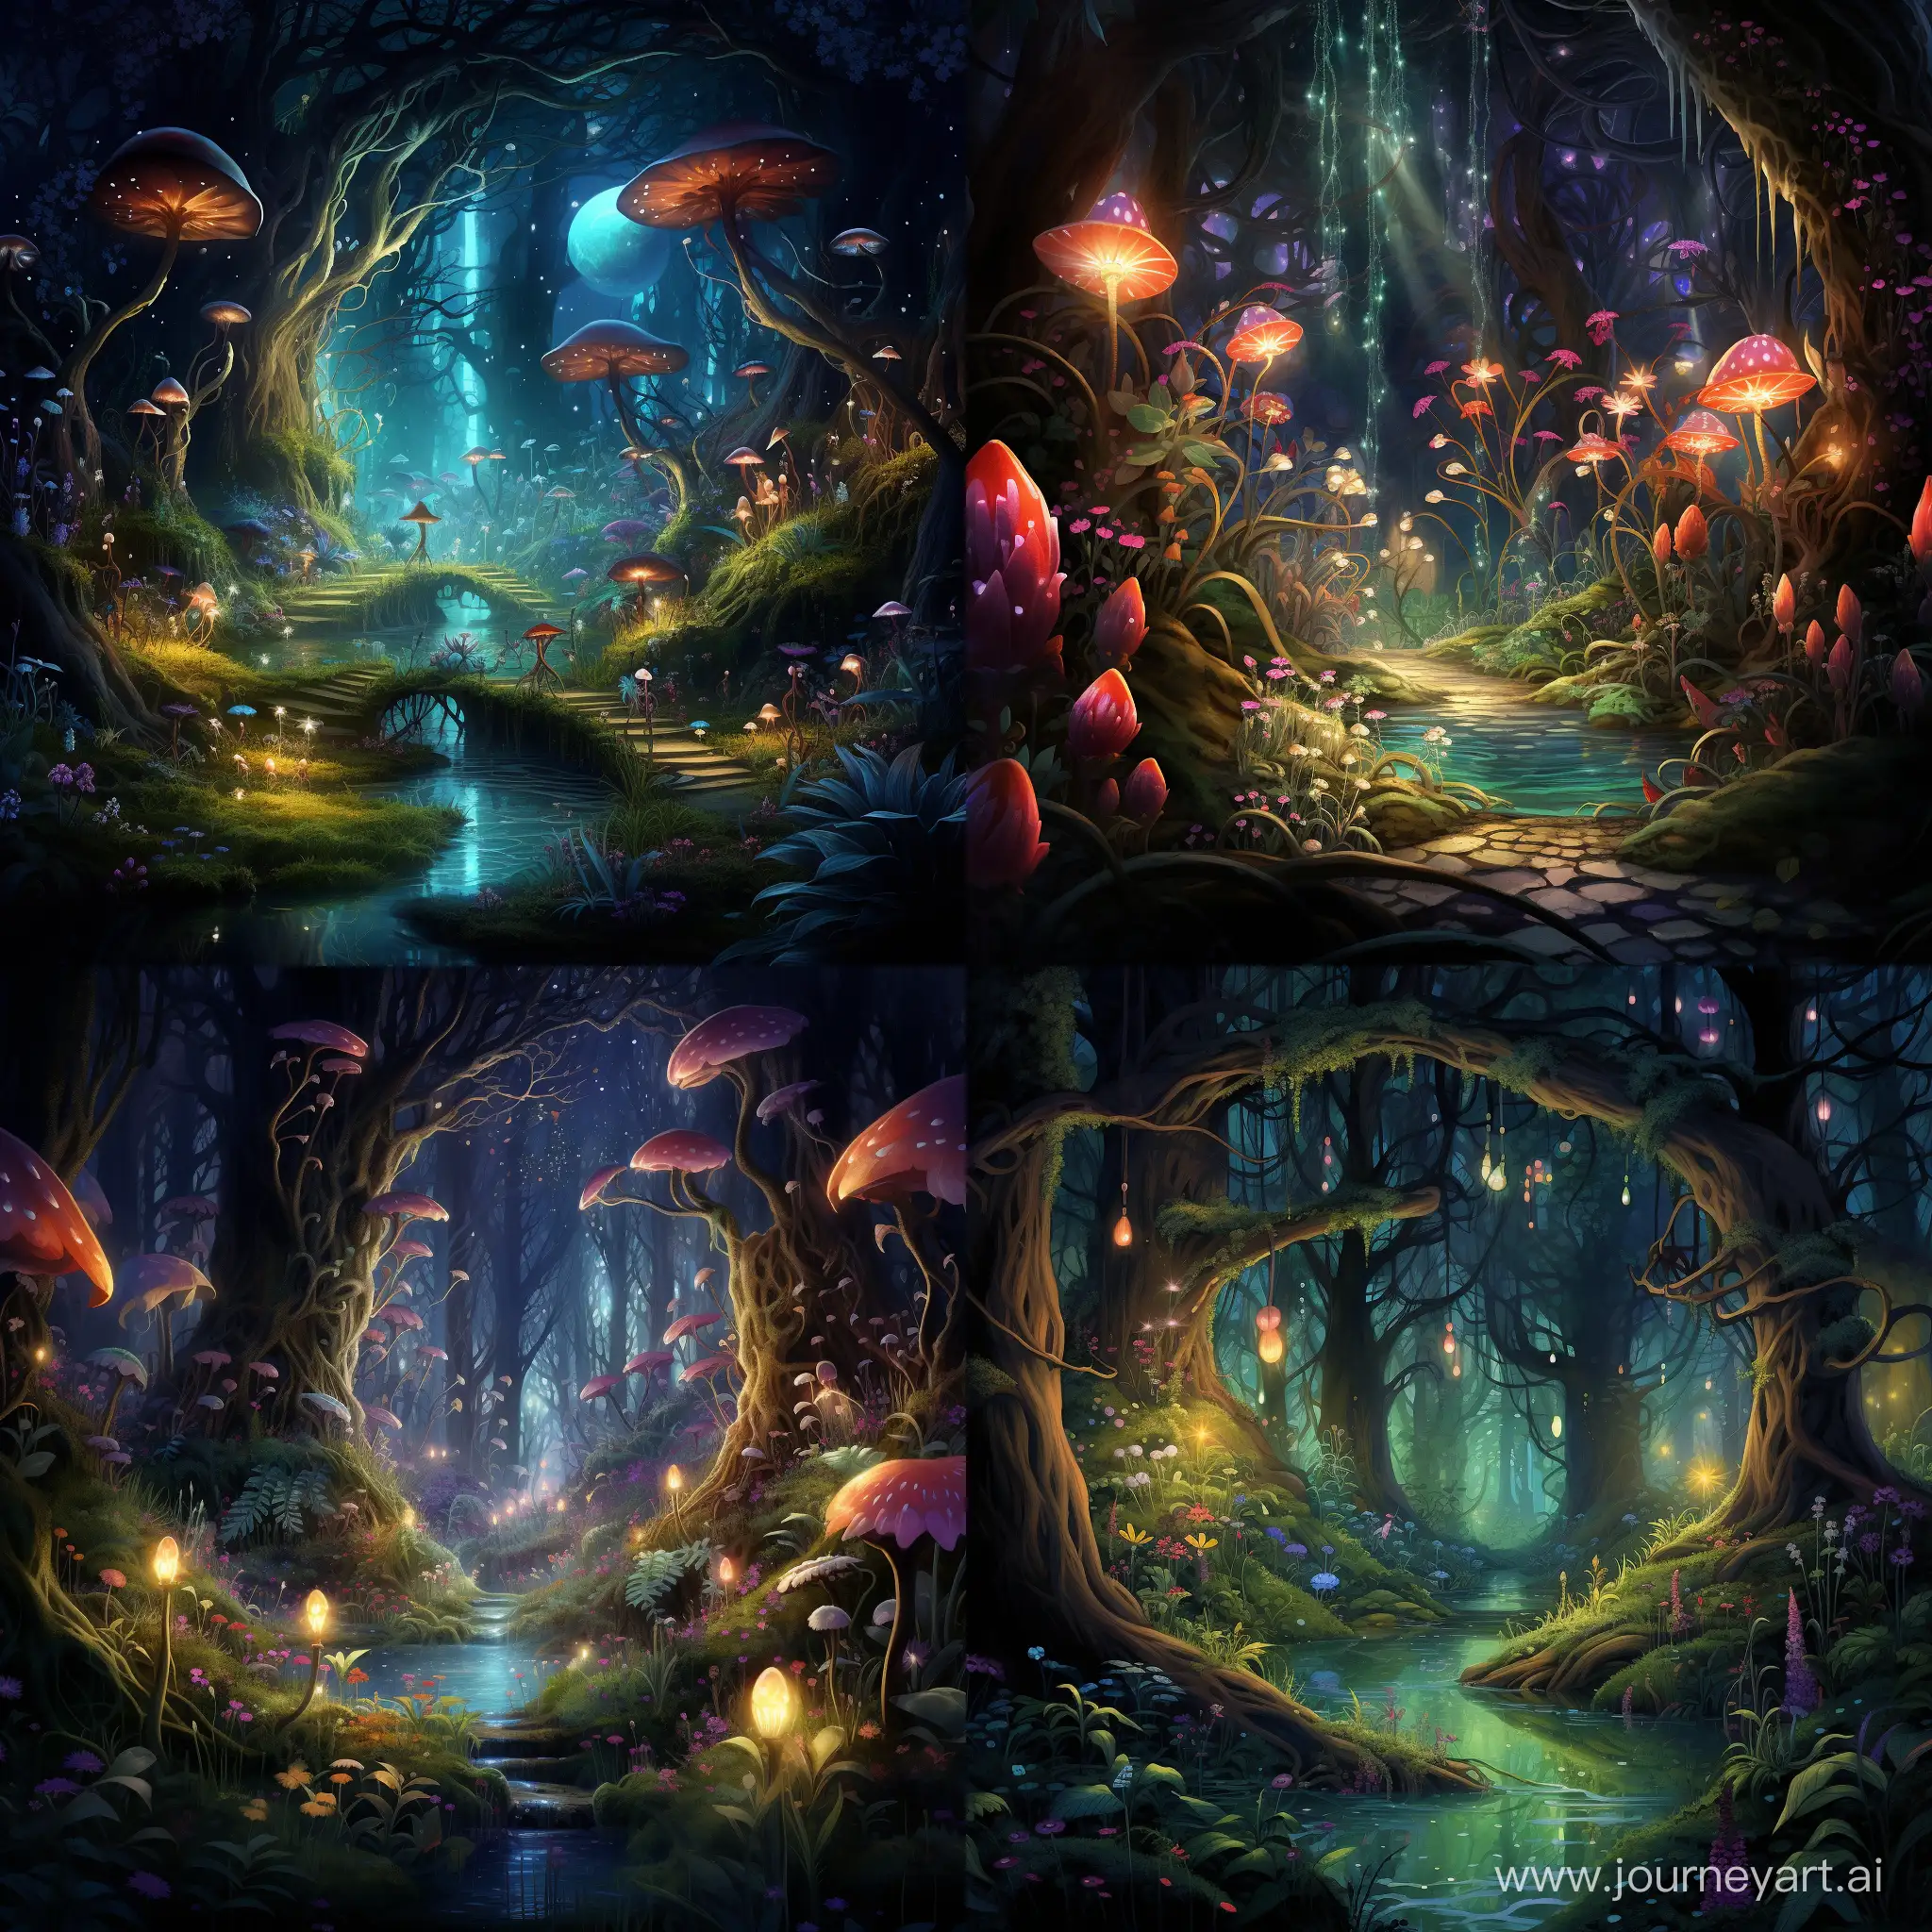 A magical forest with luminescent plants and creatures